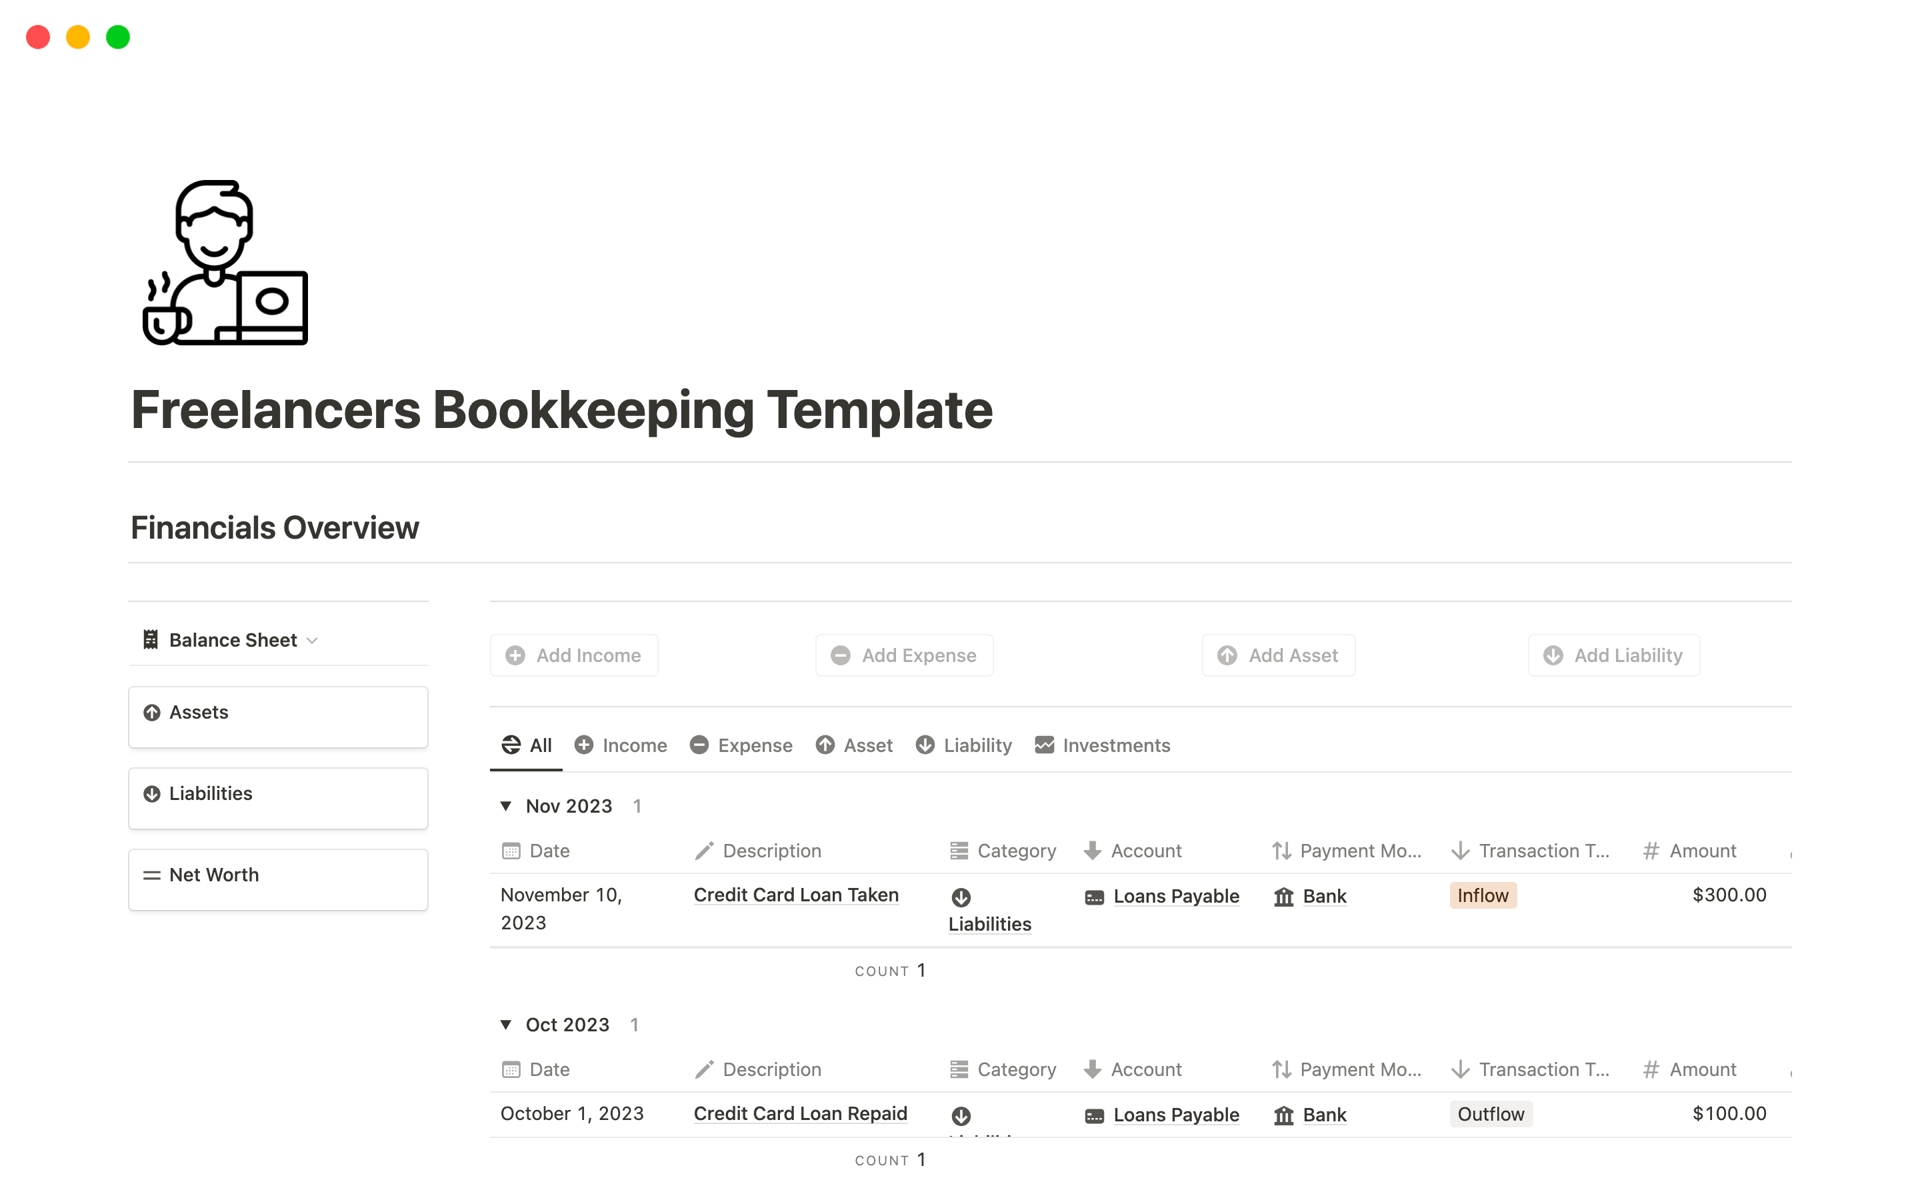 This bookkeeping template provides best solution for freelancers to manage their business finances, produce income statement, balance sheet, cash flow statement and much more on a periodical basis.